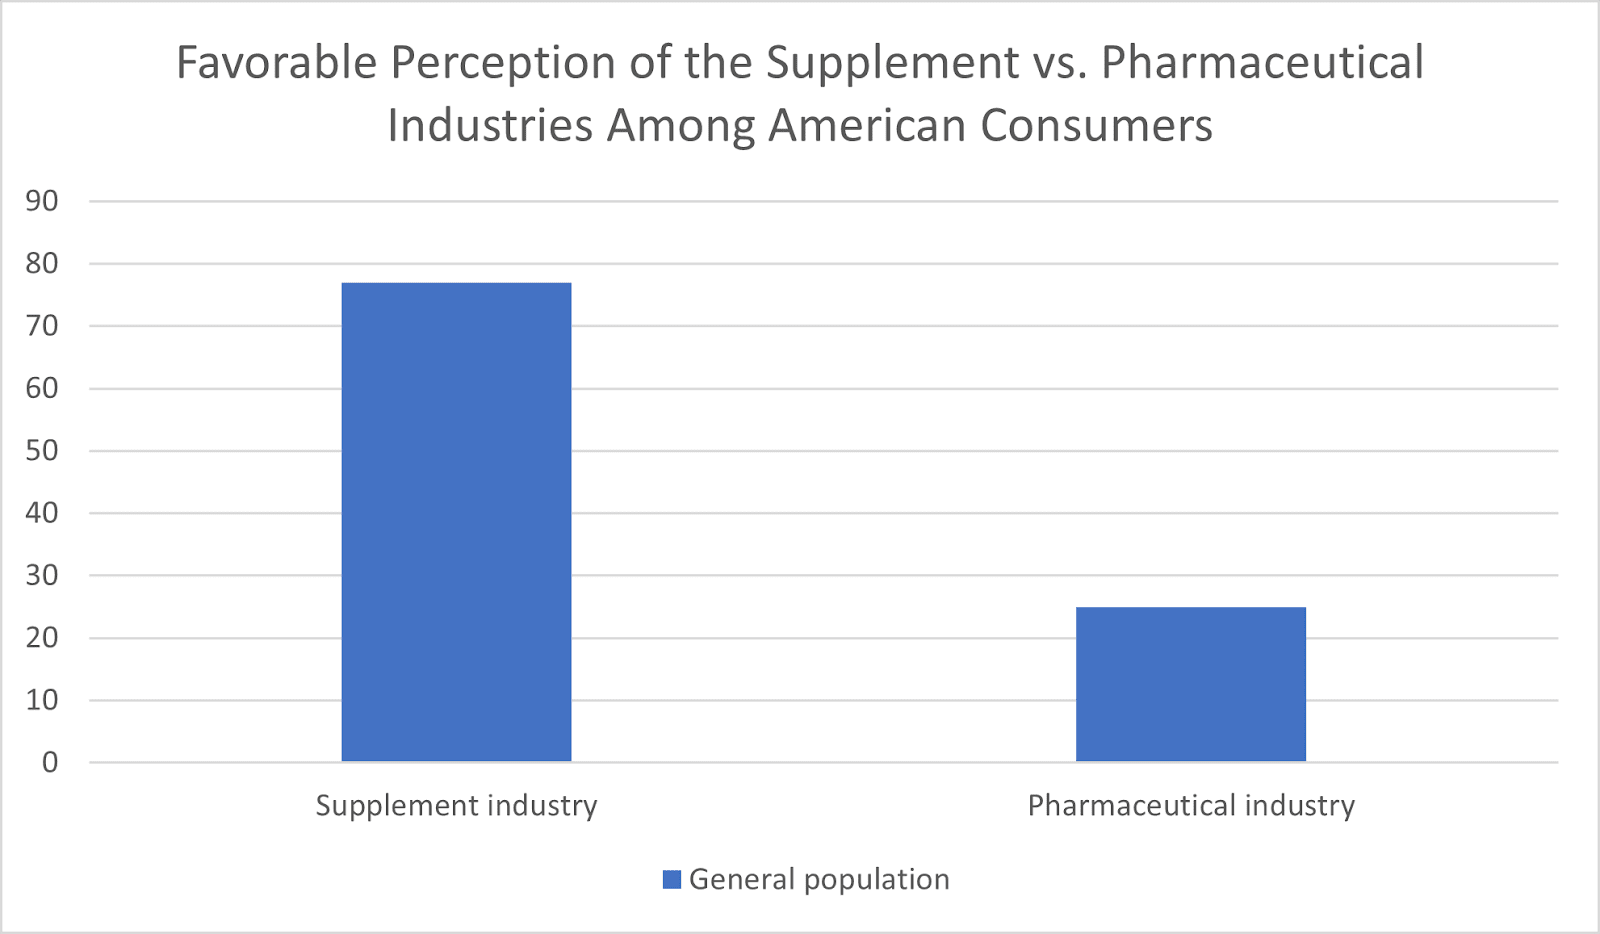 Favorable perception of the supplement vs. pharmaceutical industries among American Consumers